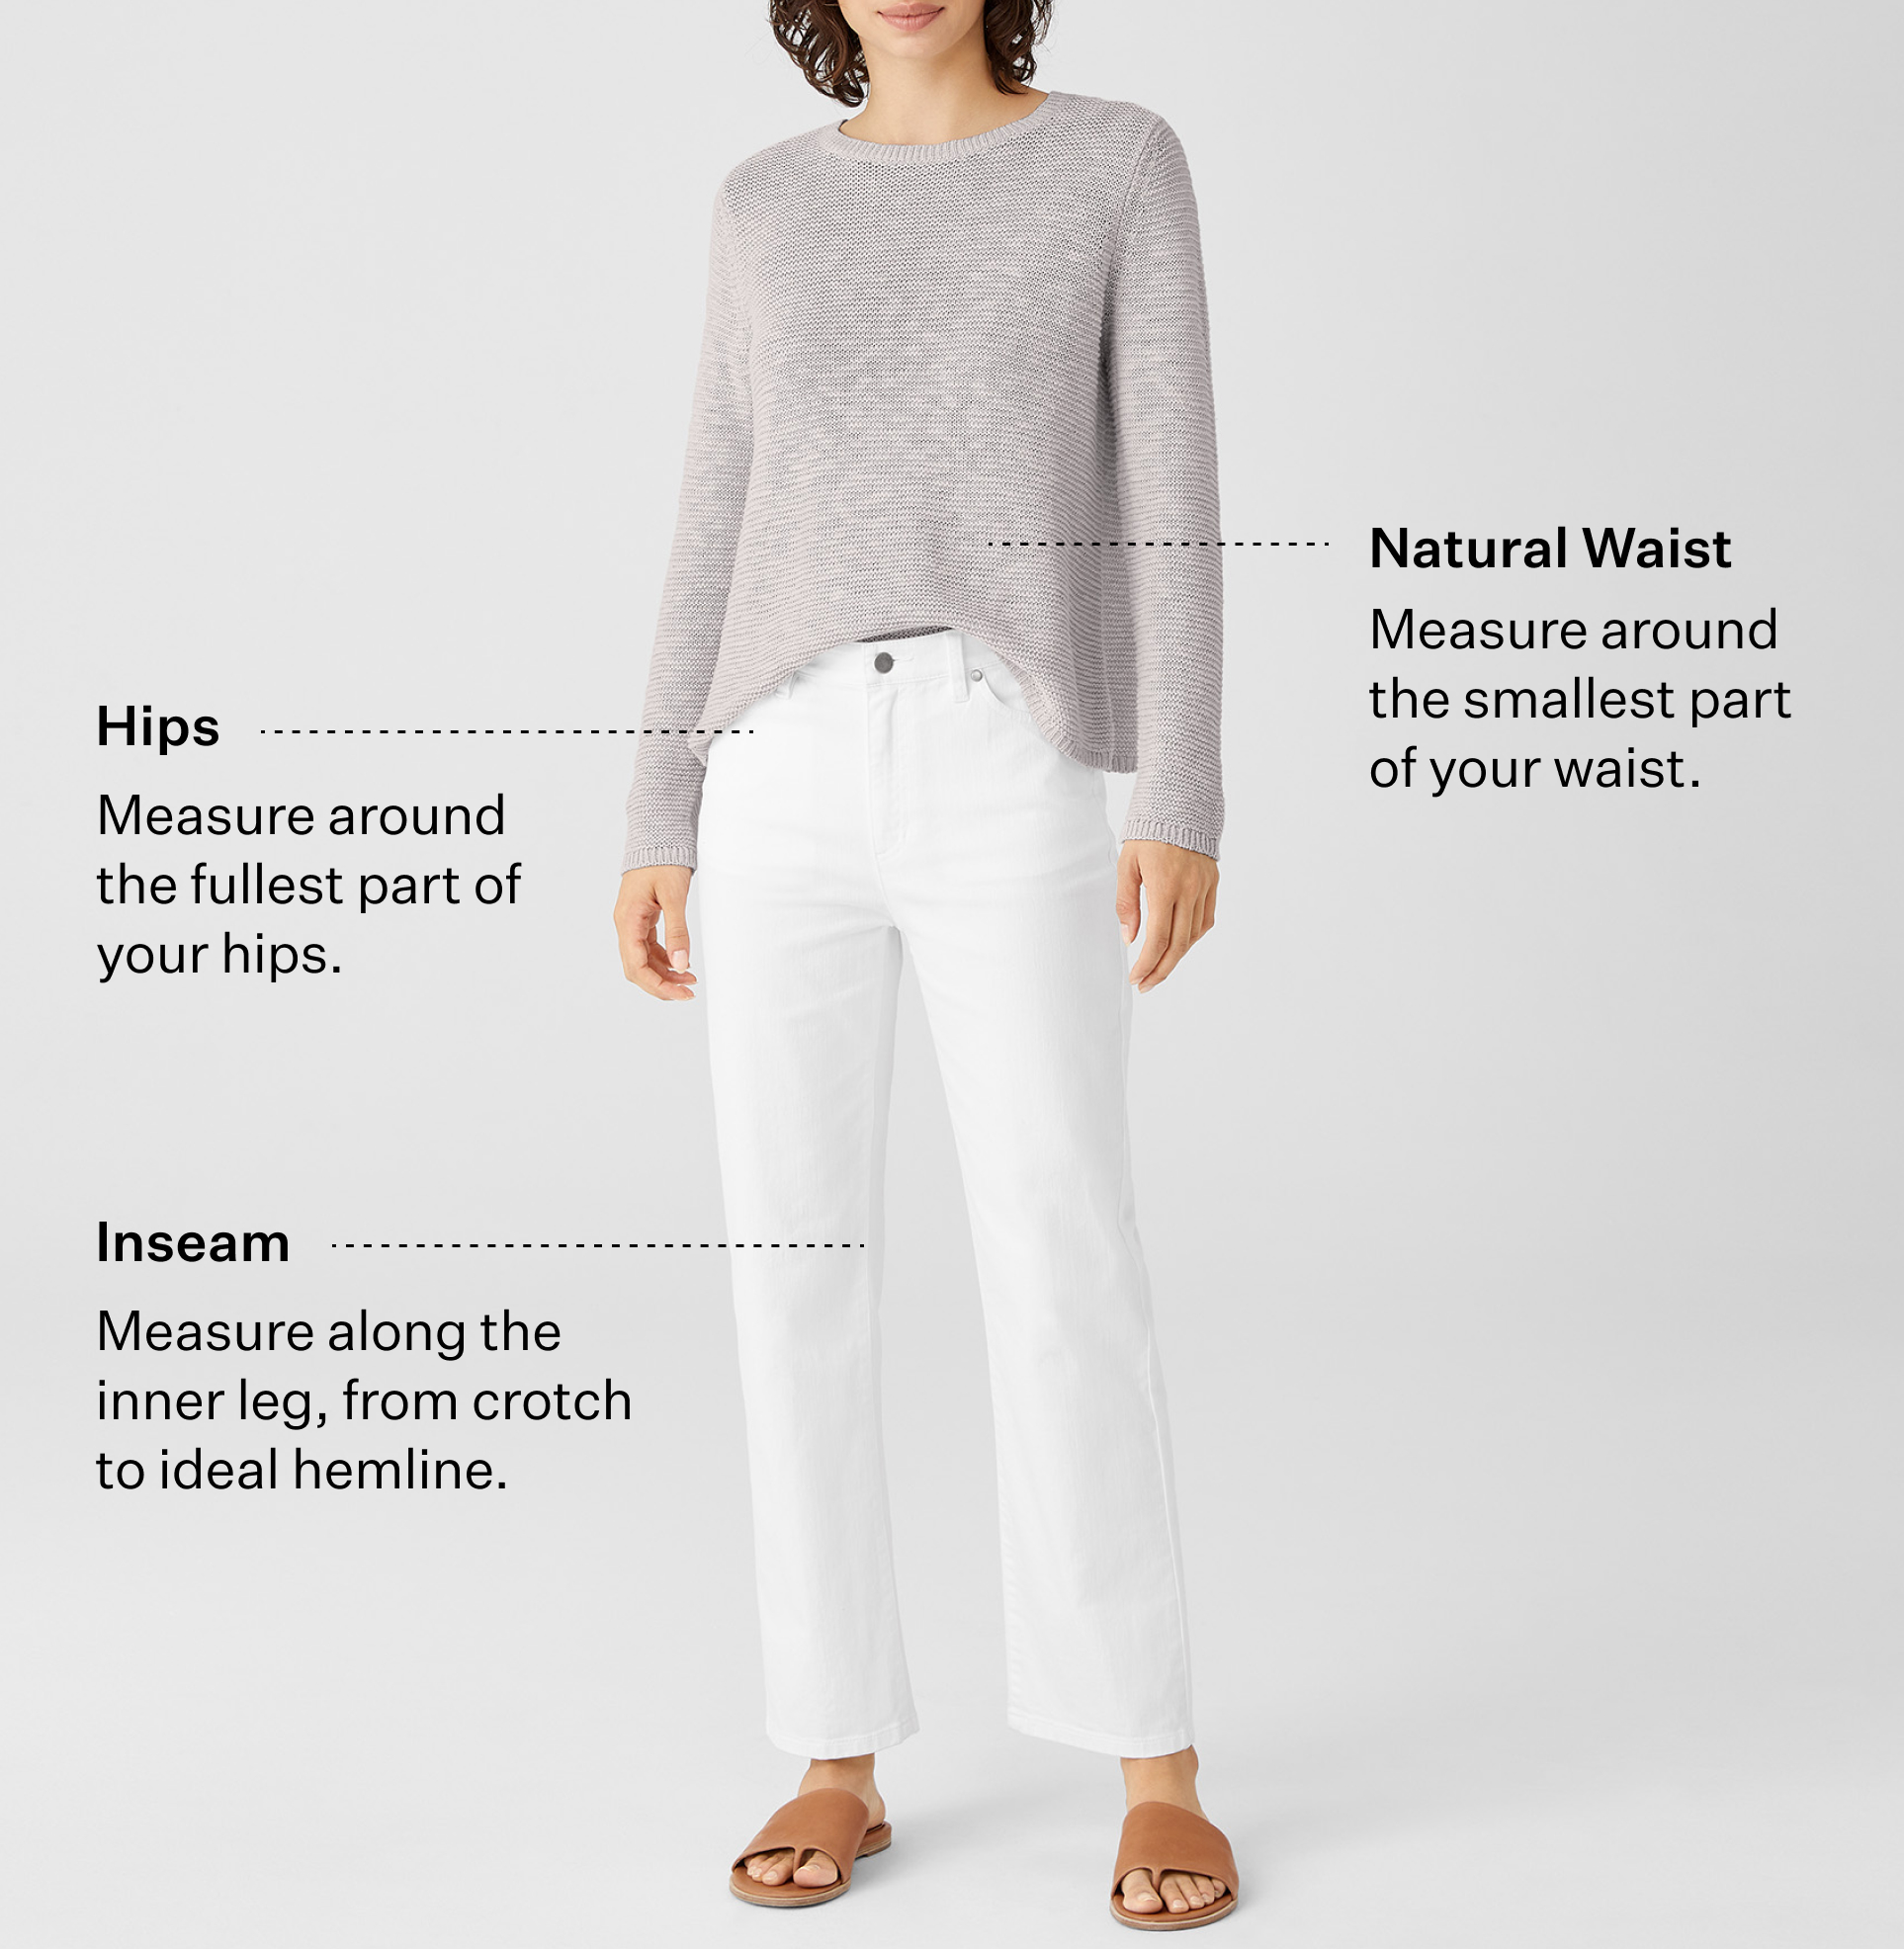 Pima Cotton Stretch Jersey Pant | EILEEN FISHER